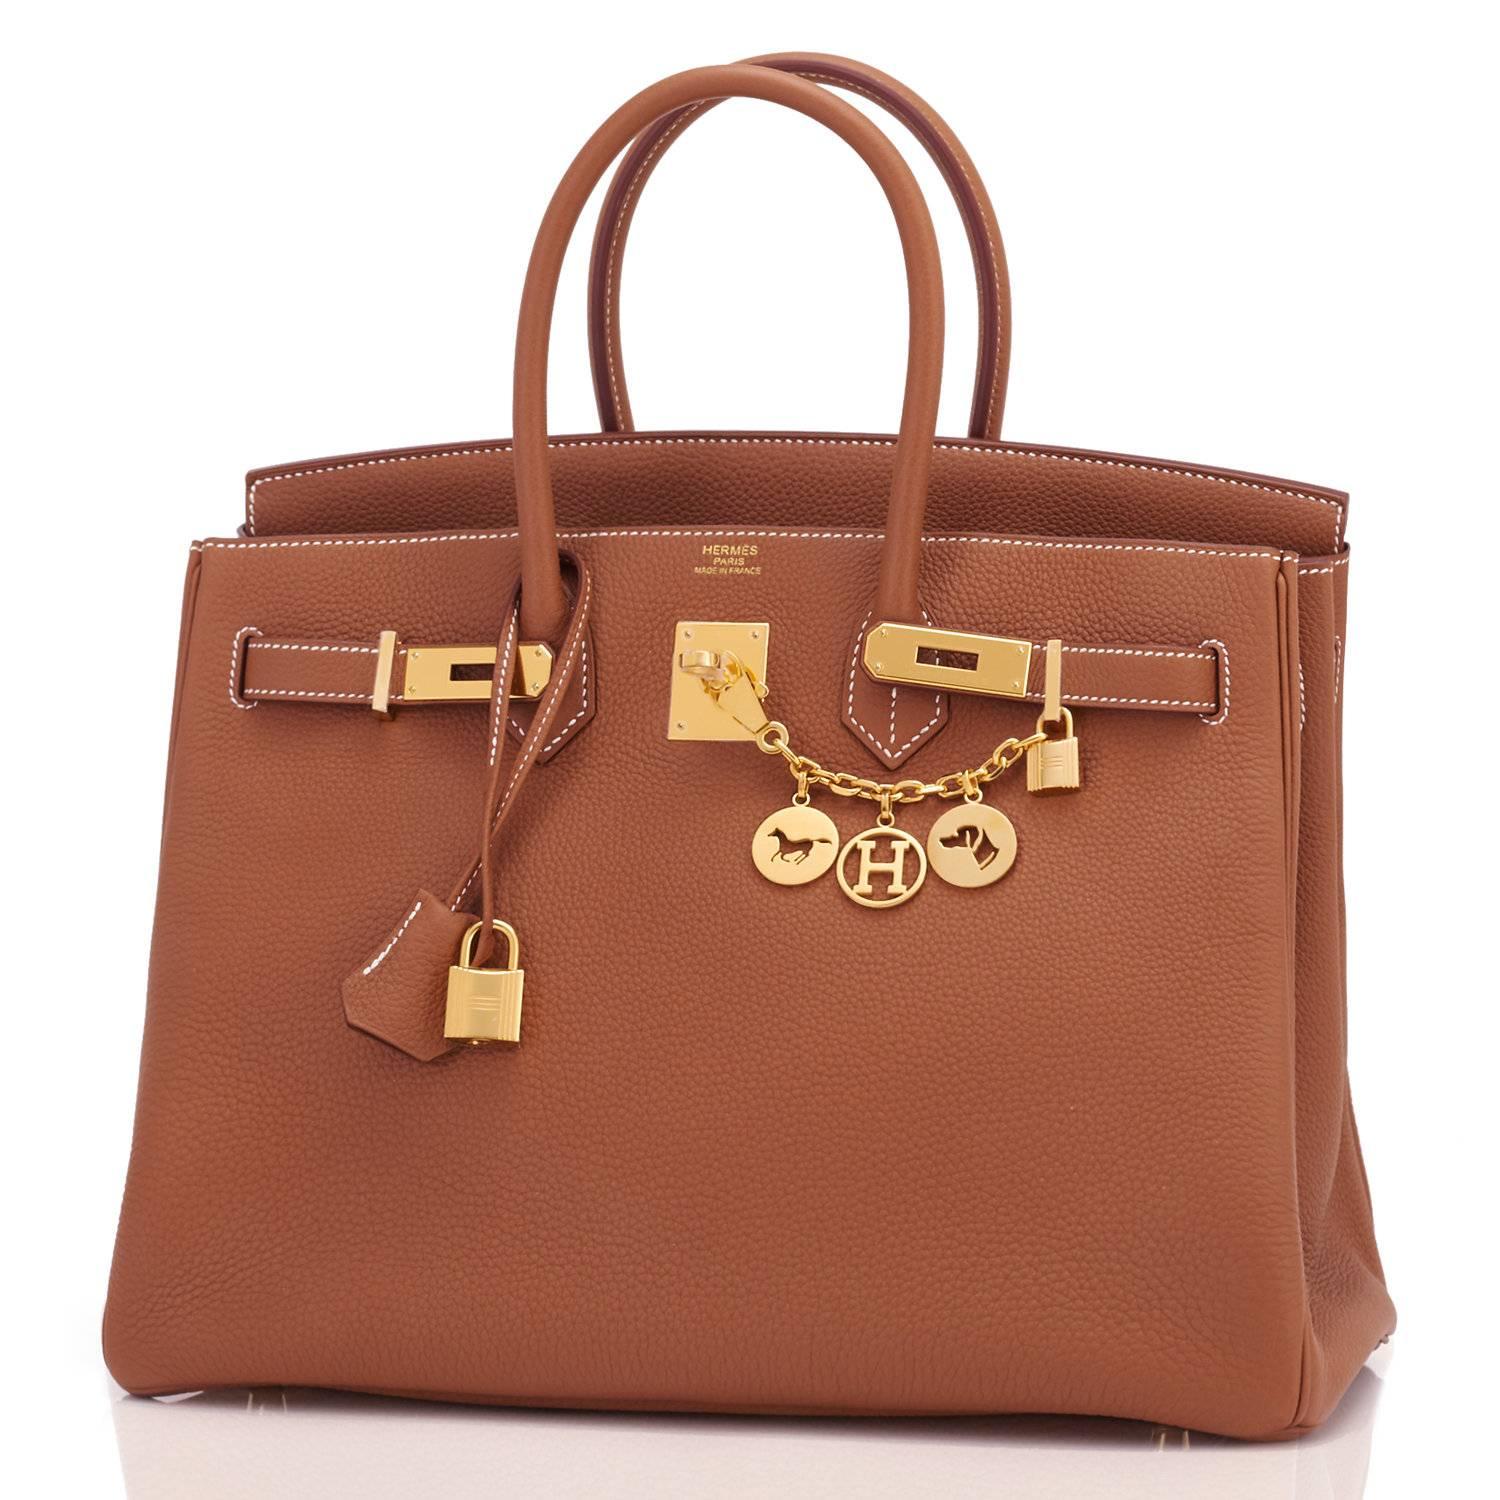 Hermes Birkin 35 Gold Togo Tan Gold Hardware Bag Z Stamp, 2021
Don't miss this hardest to find combination now- this spec is currently so rare in production! 
Just purchased from Hermes store. Bag bears new 2021 interior Z Stamp.
Store Fresh.